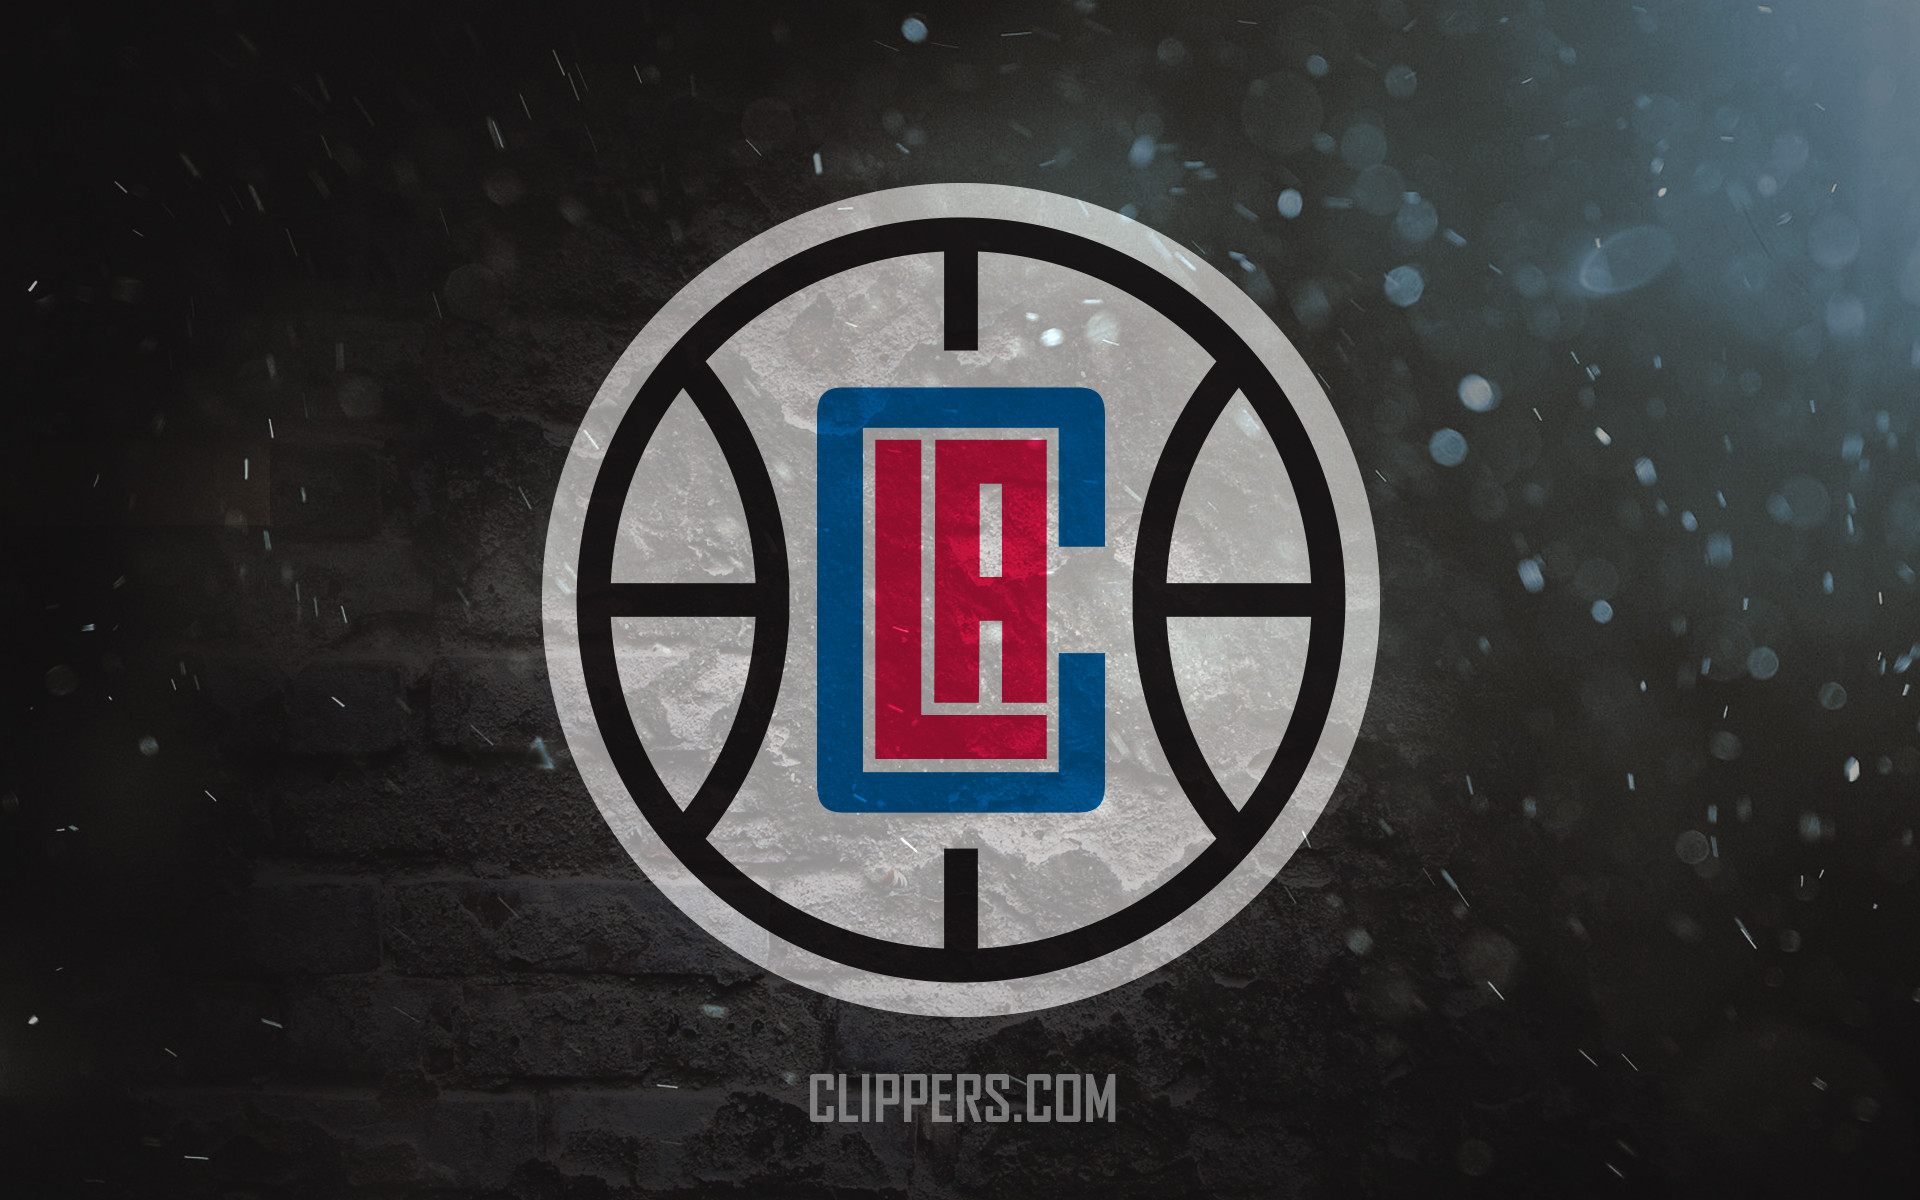 Los Angeles Clippers Wallpaper Image